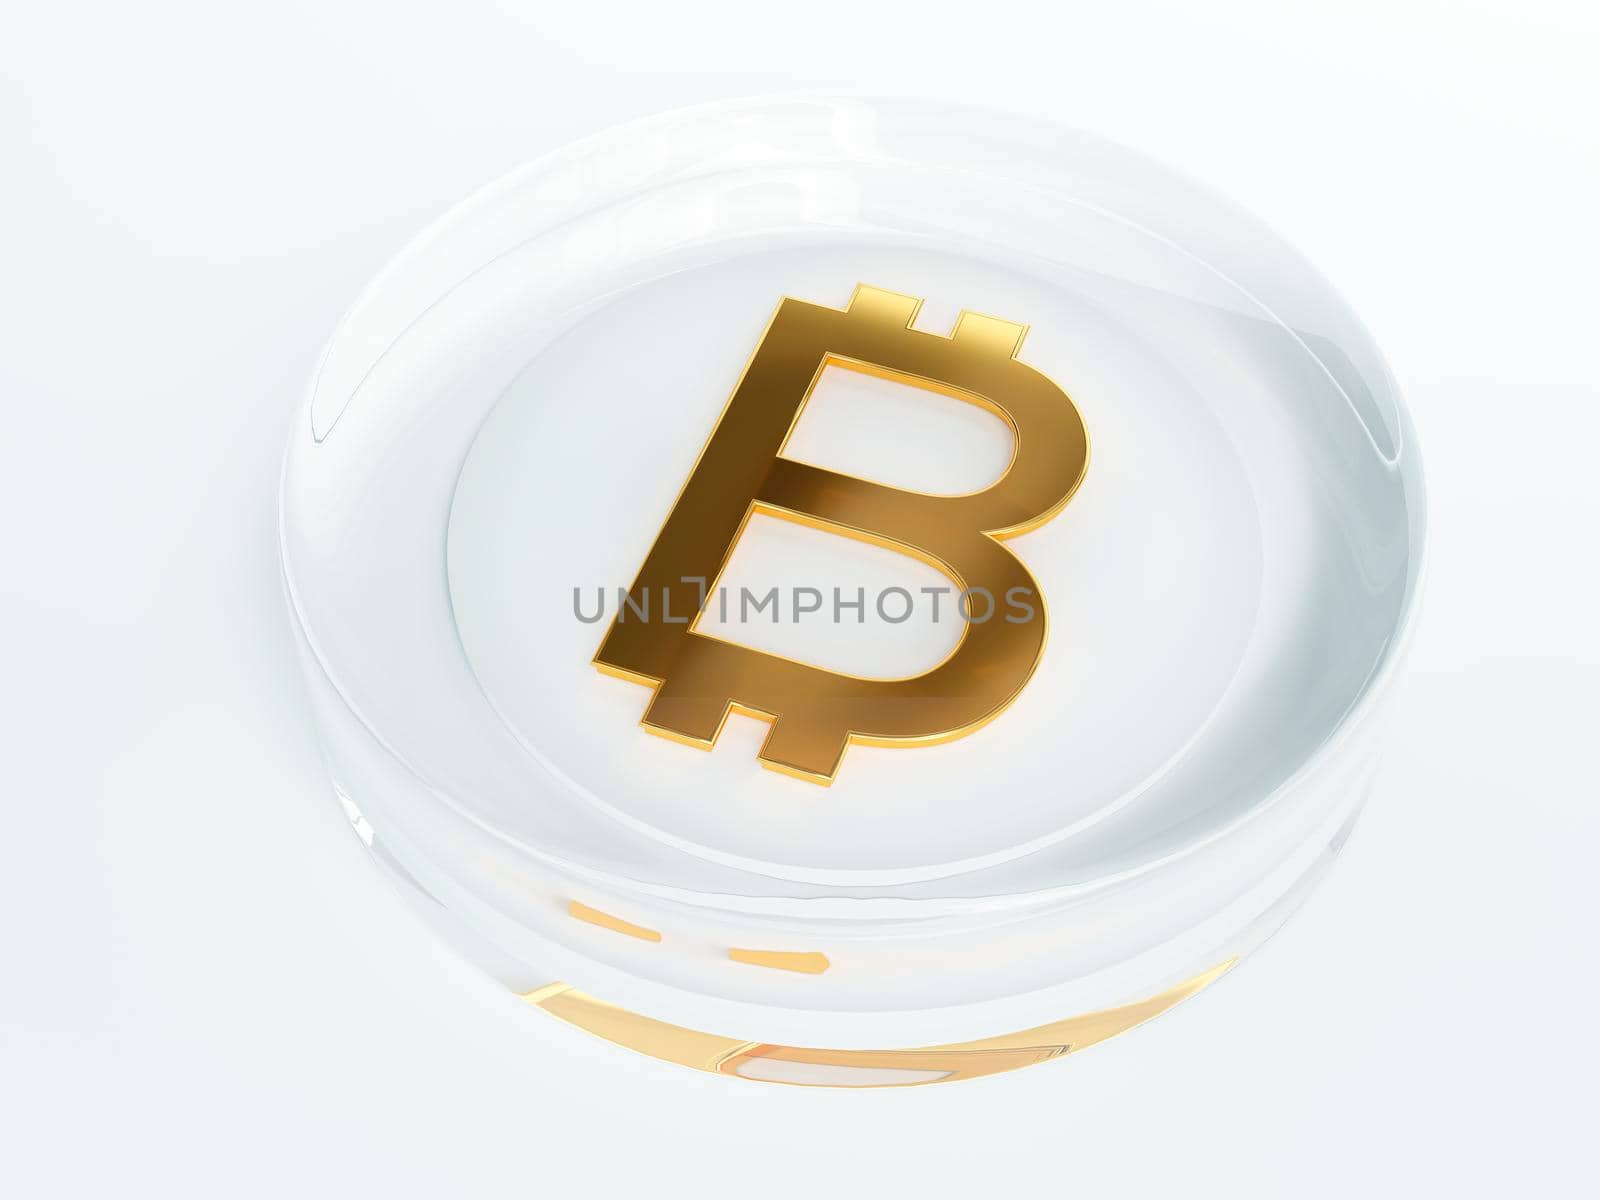 bitcoin cryptocurrency golden symbol covered with transparent glass or plastic 3d render, 3d illustration